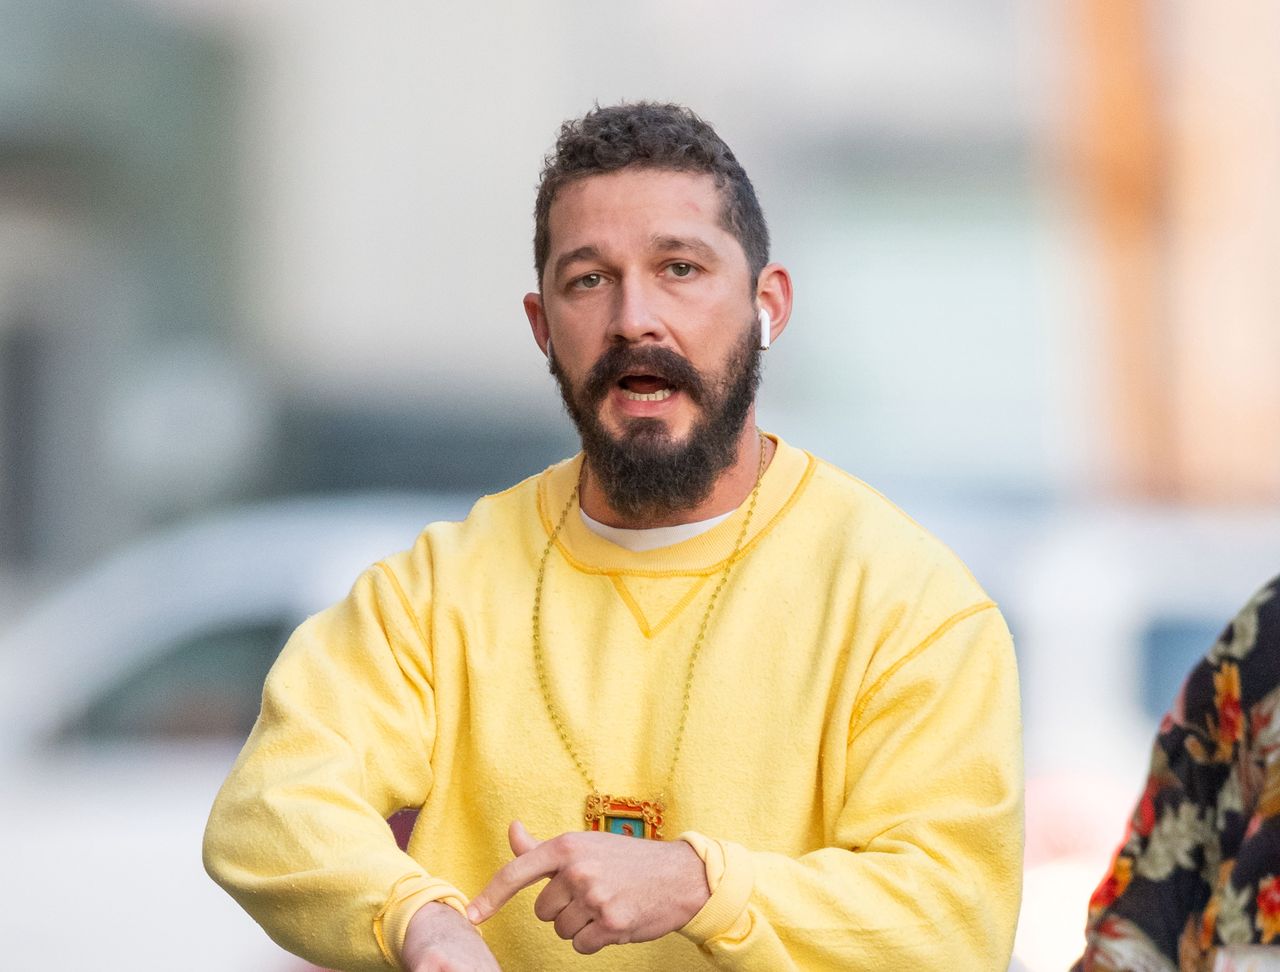 From Hollywood bad boy to spiritual devotee. Shia LaBeouf's conversion to Catholicism